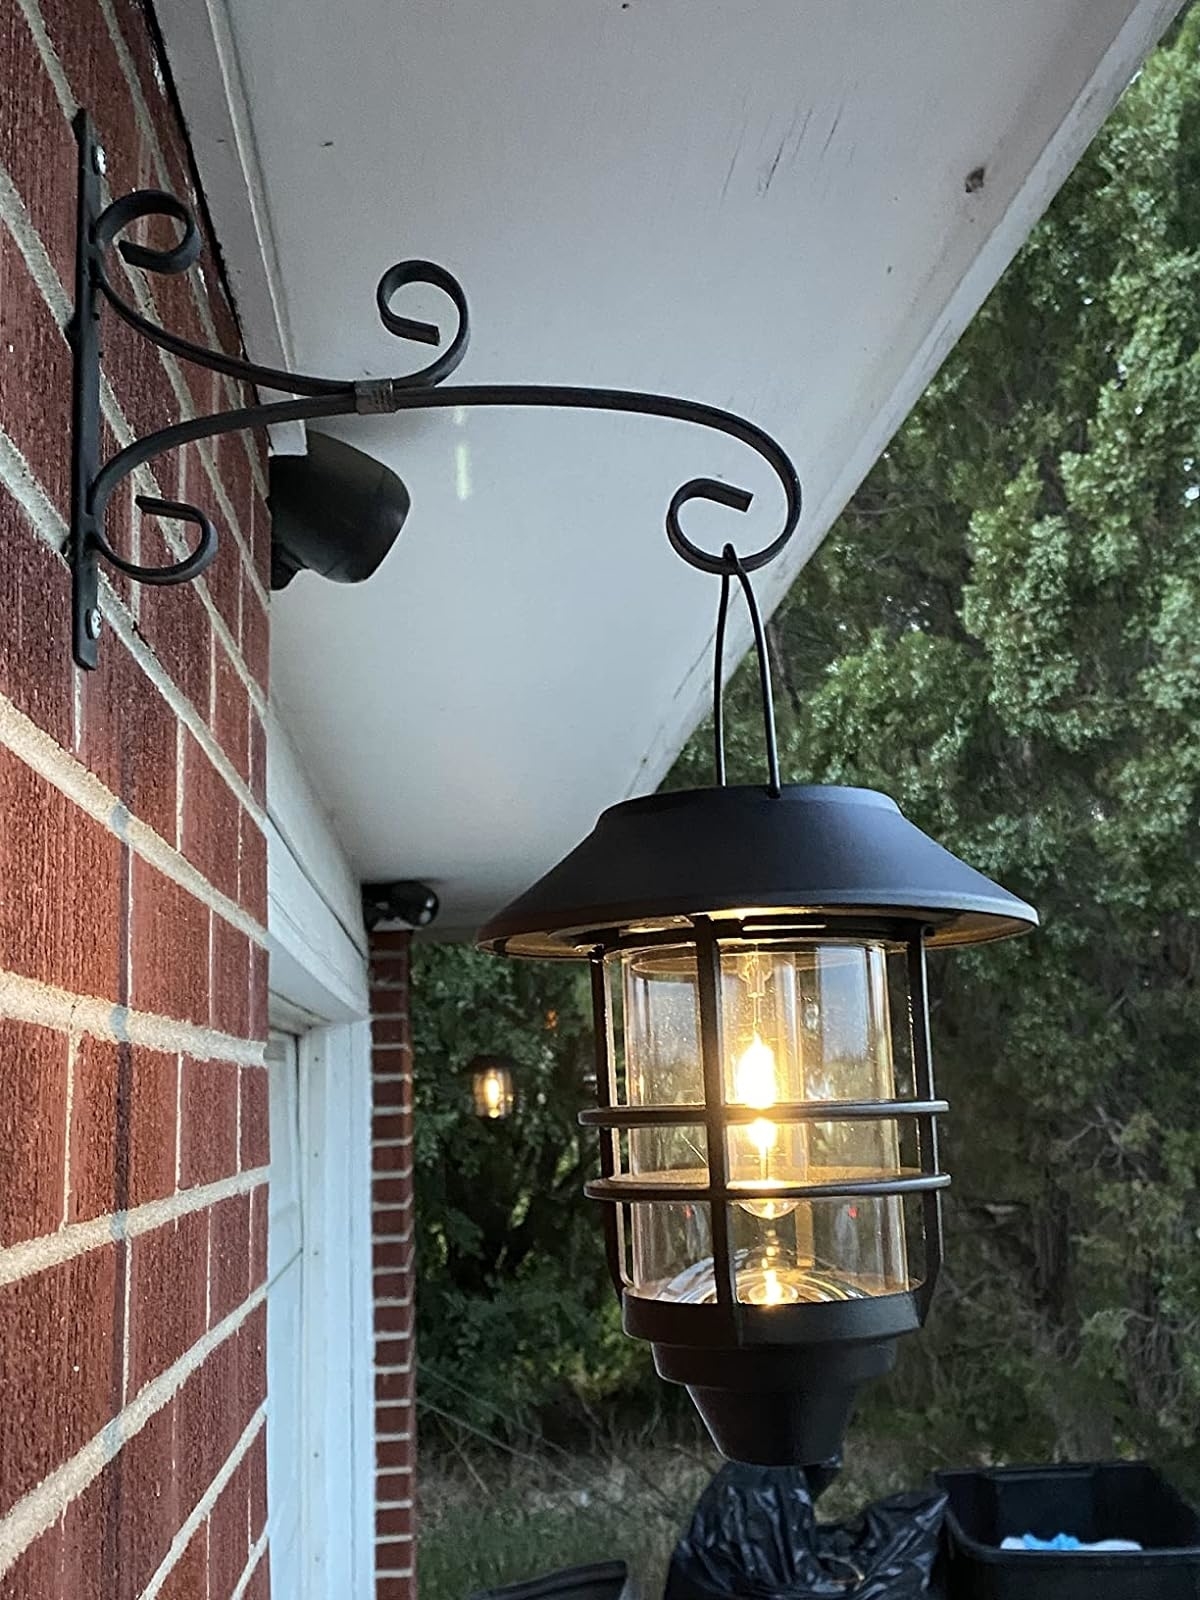 Reviewer image of the lantern hanging from a brick exterior wall